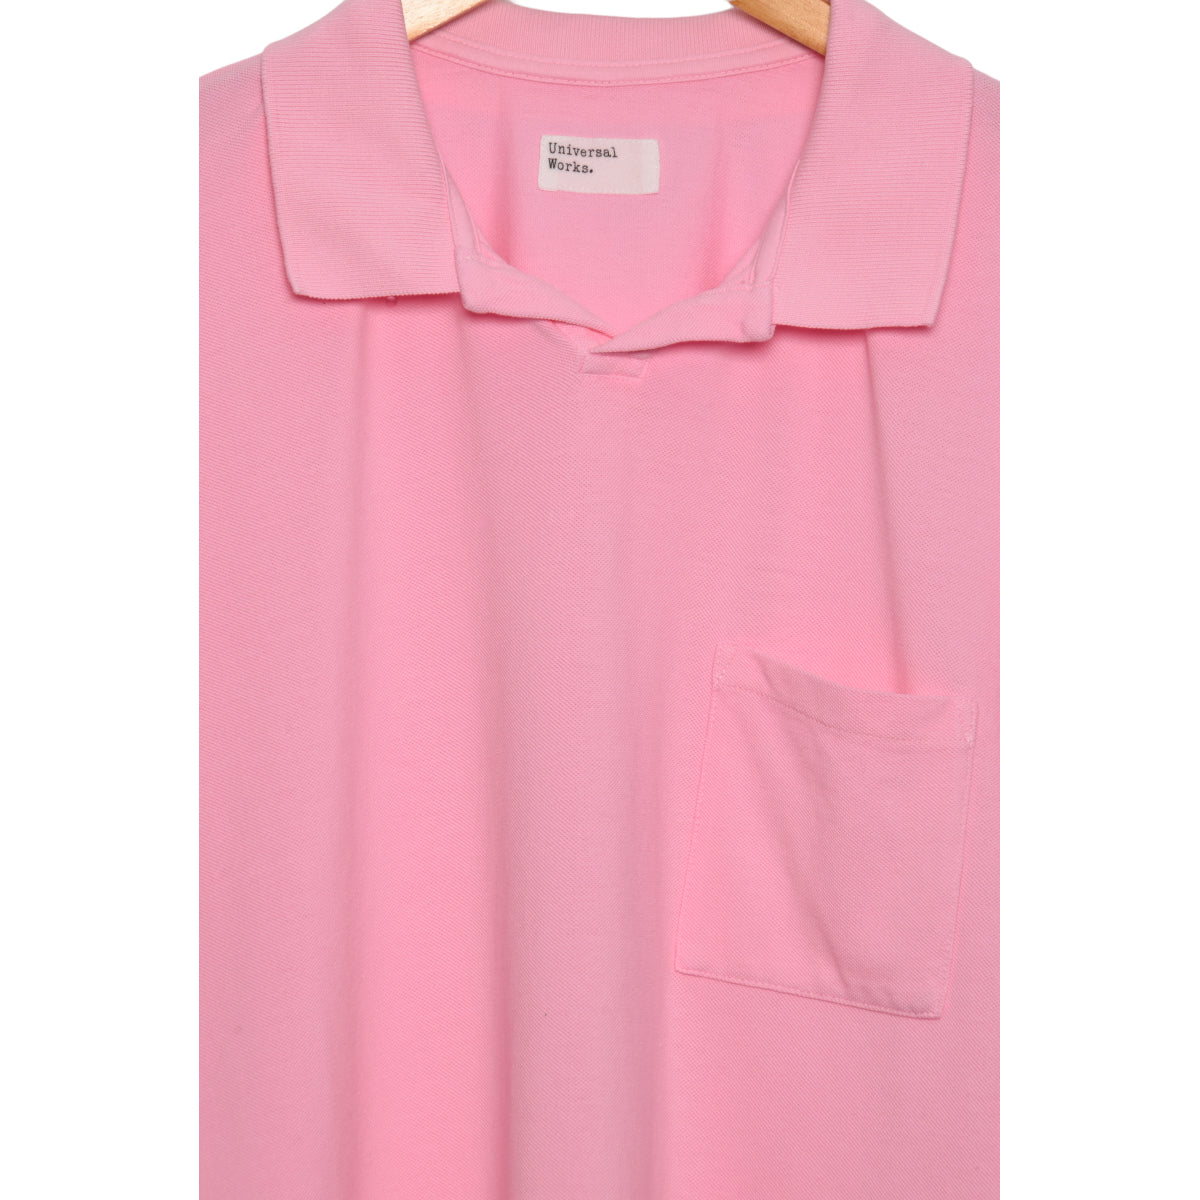 Universal Works Vacation Polo piquet pink 28603